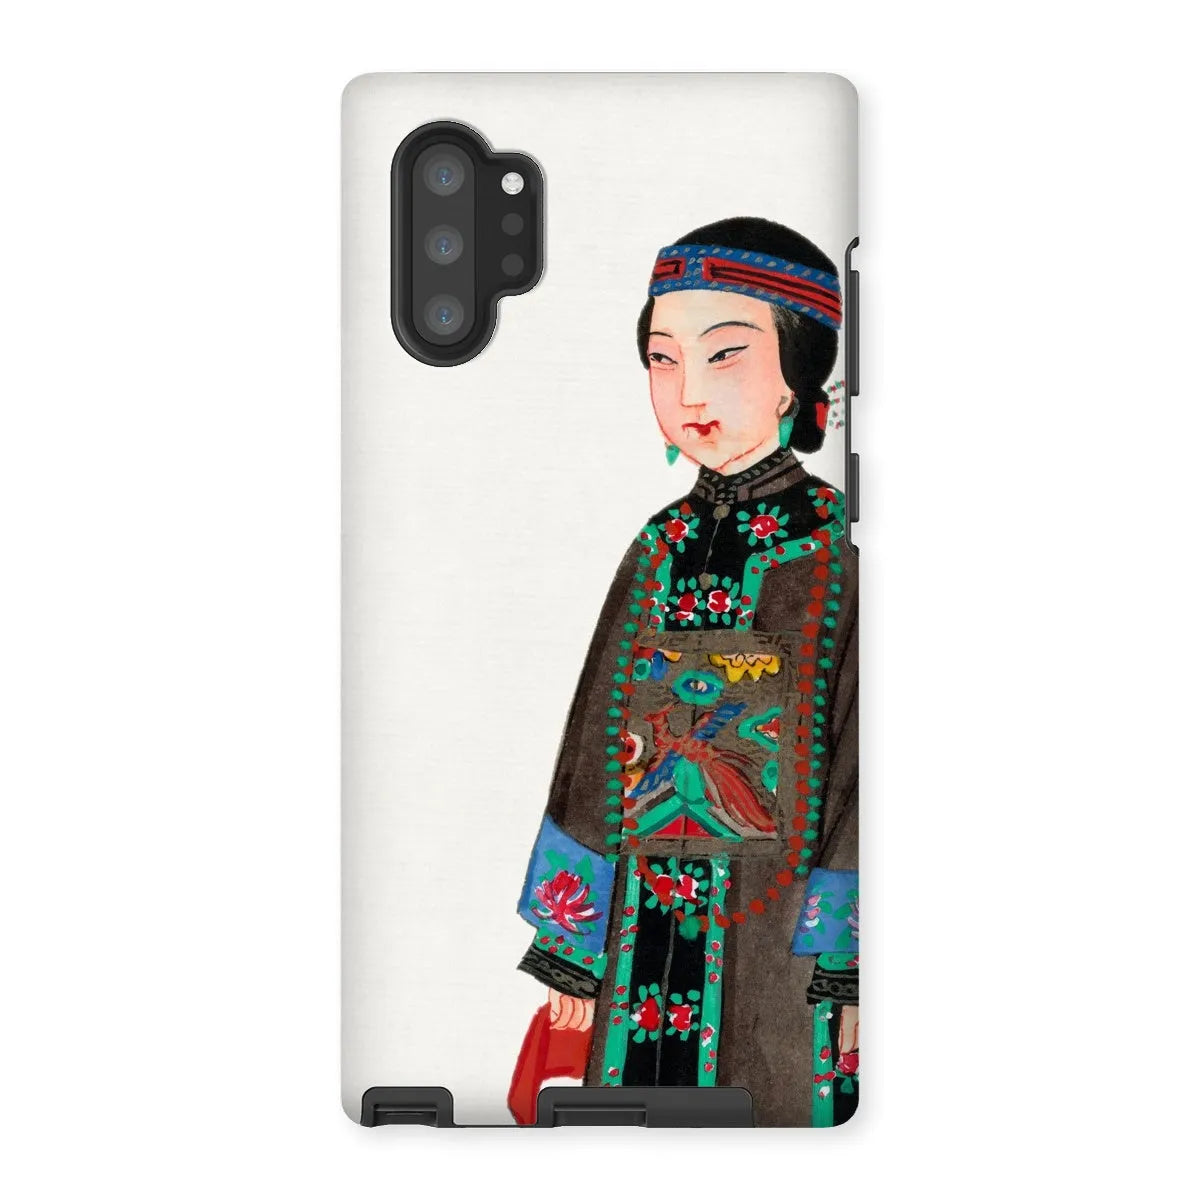 Noblewoman At Court - Chinese Aesthetic Art Phone Case - Samsung Galaxy Note 10p / Matte - Mobile Phone Cases